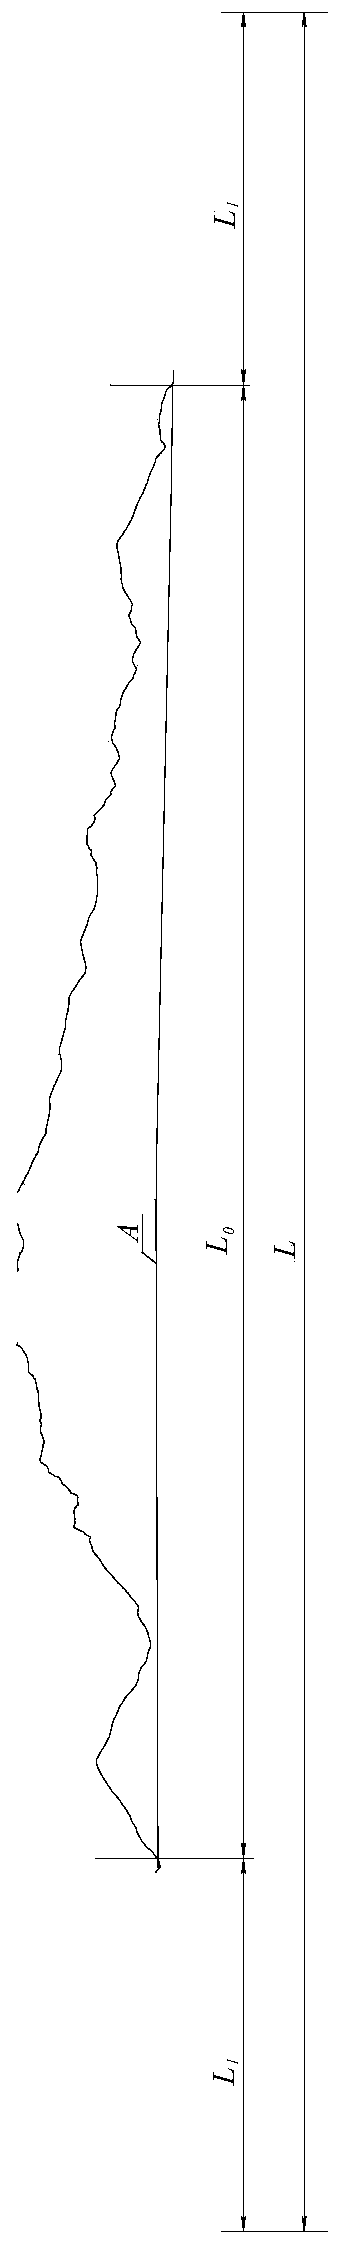 Arrangement method of exploration survey lines for railway tunnel with airborne electromagnetic method